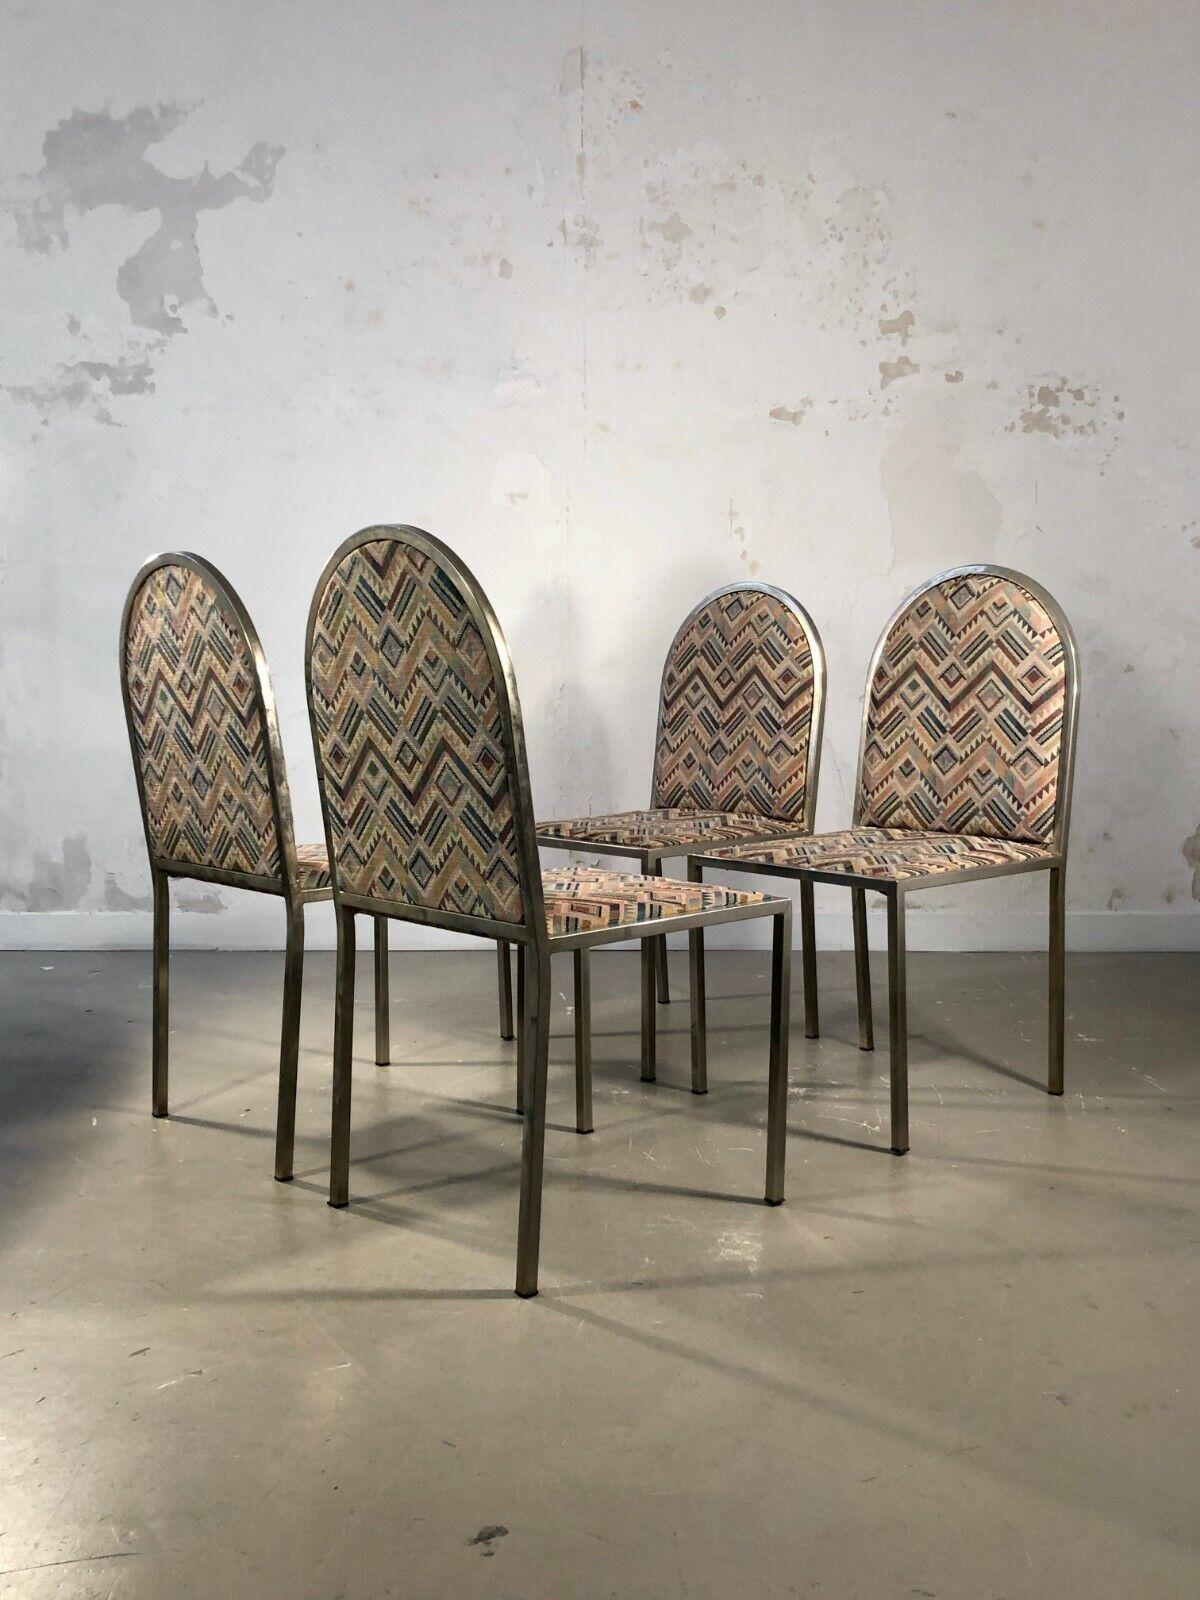 A set of 4 Post-Modernist chairs, Memphis, Bauhaus, metal structures with square section and rounded backs, seats in superb and comfortable fabrics with Bauhaus-inspired geometric patterns, attributed to Willy Rizzo, France